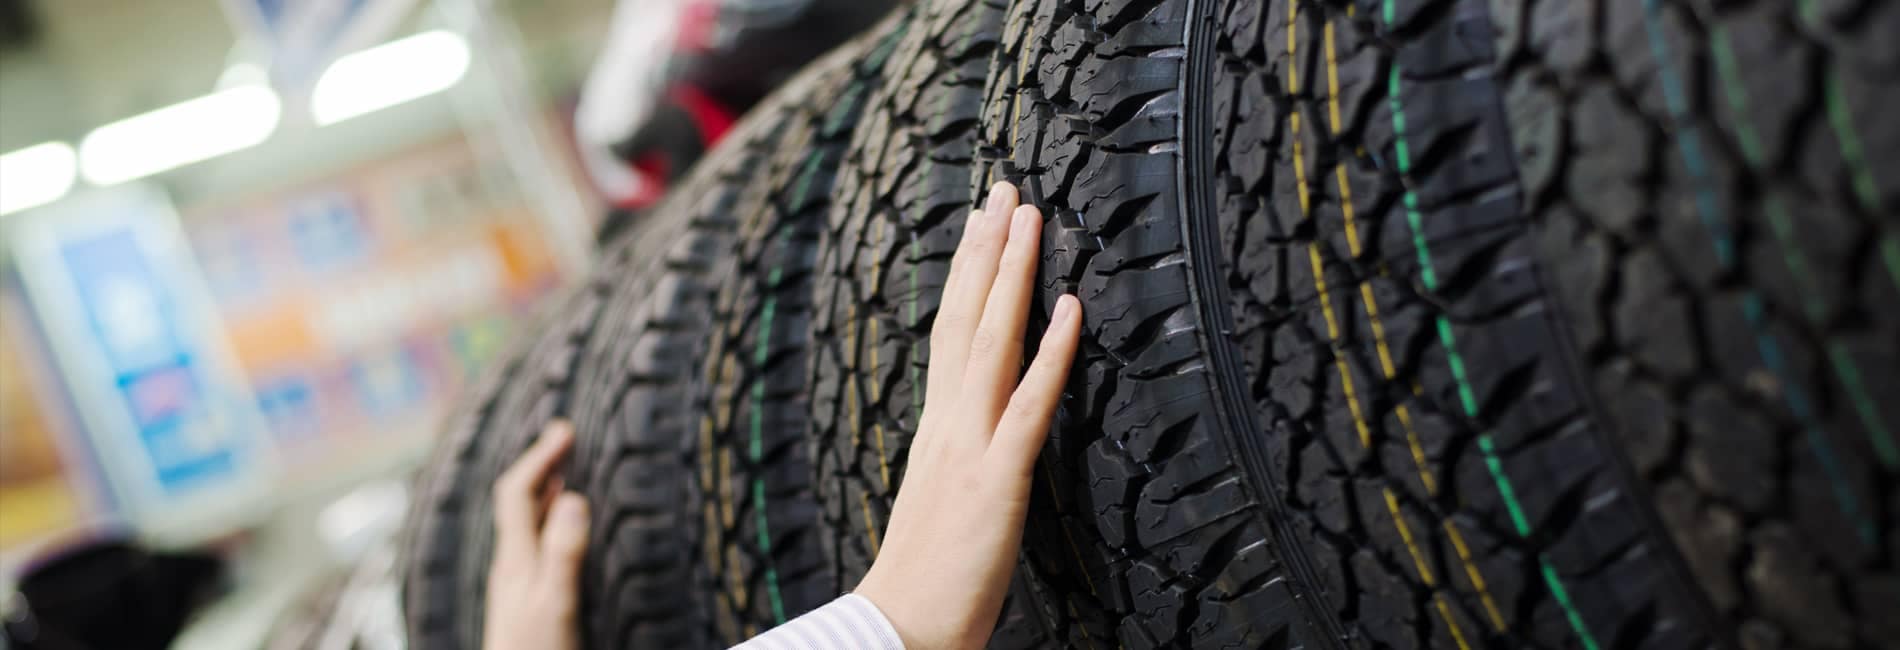 Hands Inspecting Tires in Tire Store